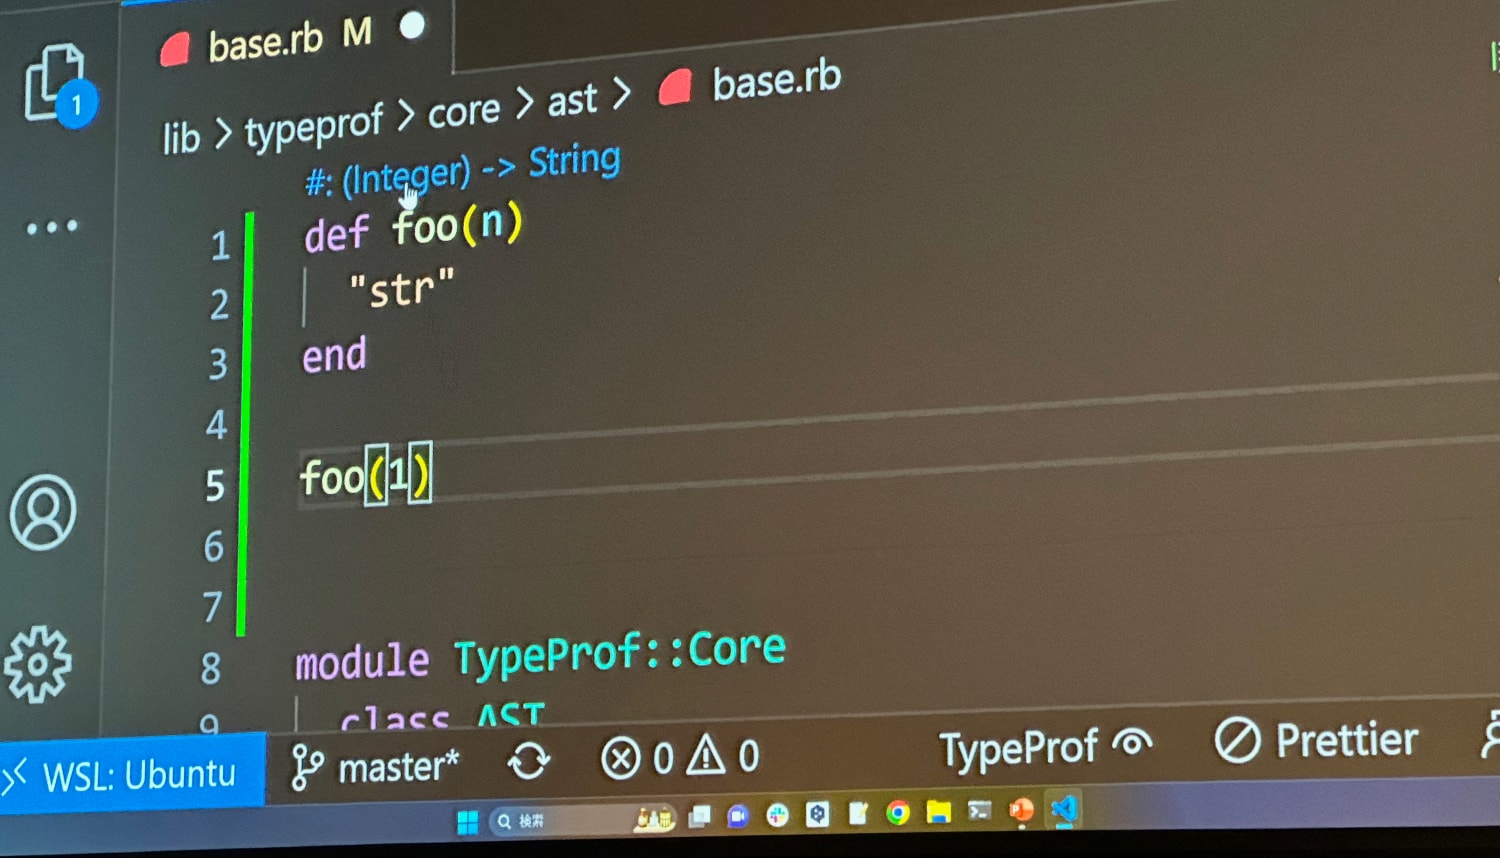 VS Code: calling the method with an integer updates the type inference